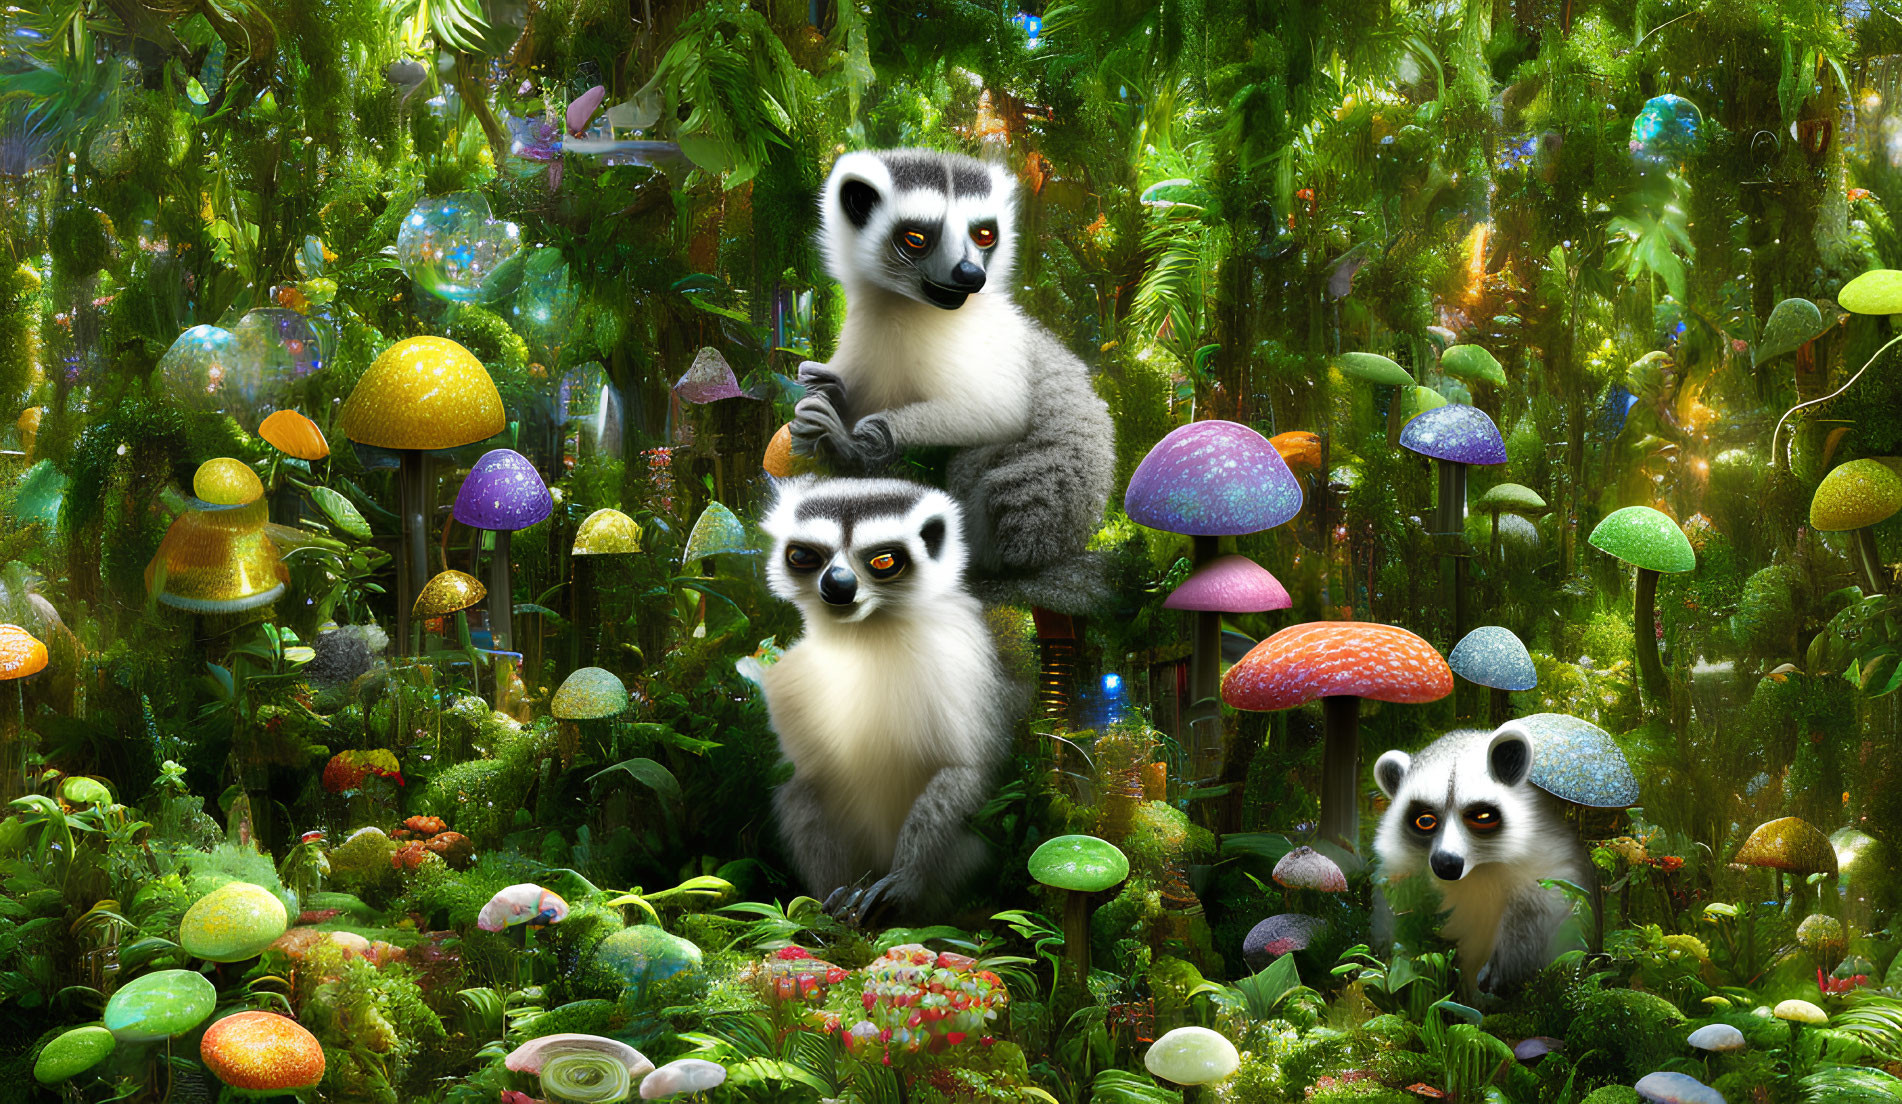 Colorful Cartoon Lemurs in Enchanted Forest Glade